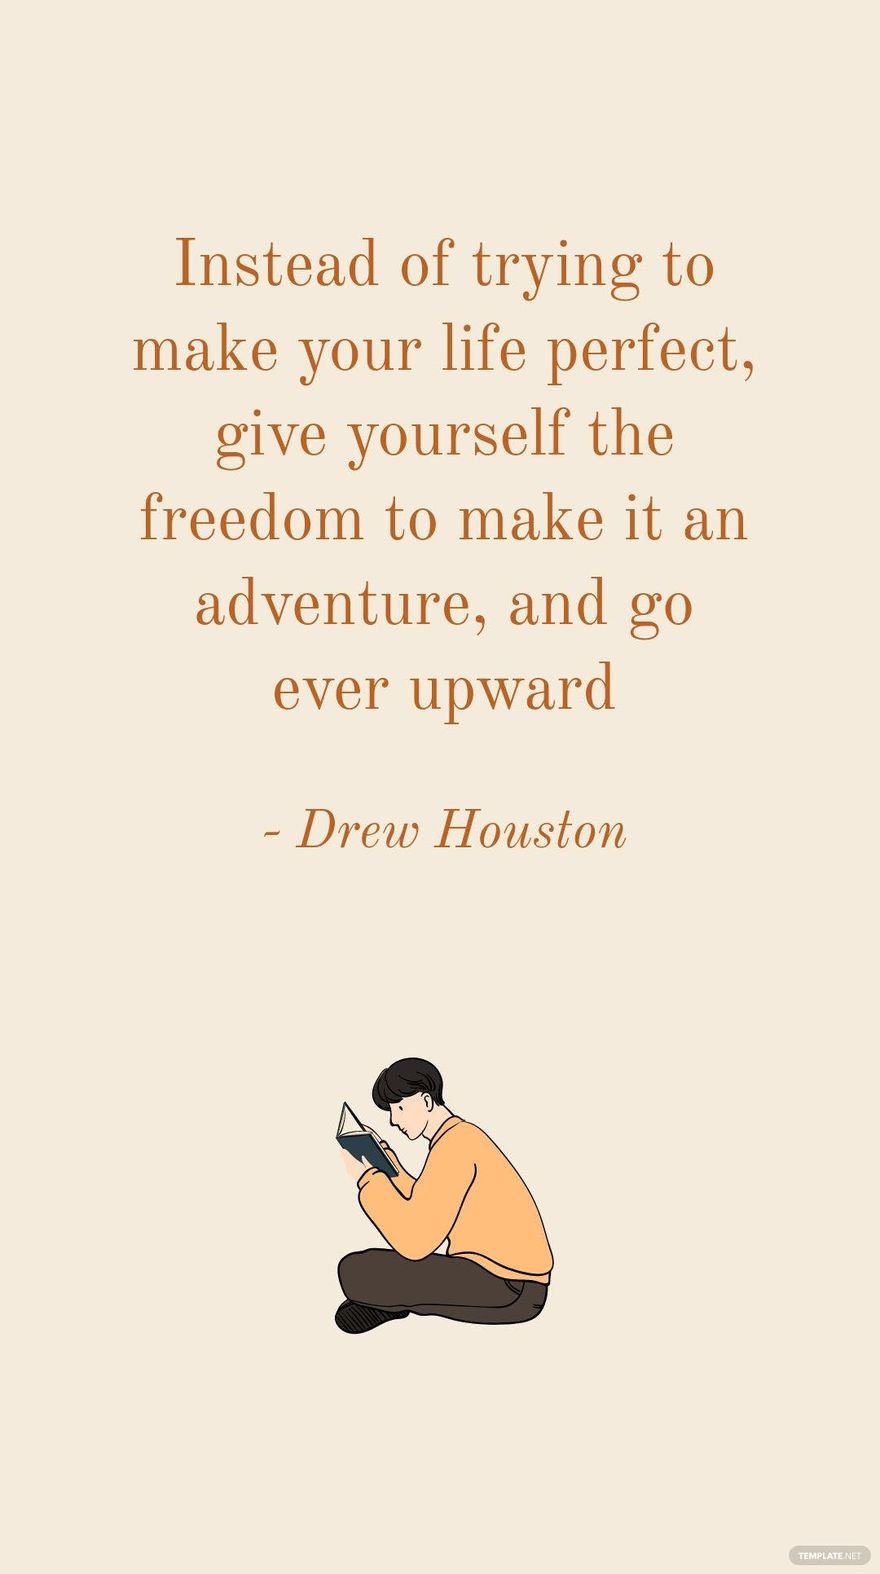 Free Drew Houston - Instead of trying to make your life perfect, give yourself the freedom to make it an adventure, and go ever upward in JPG